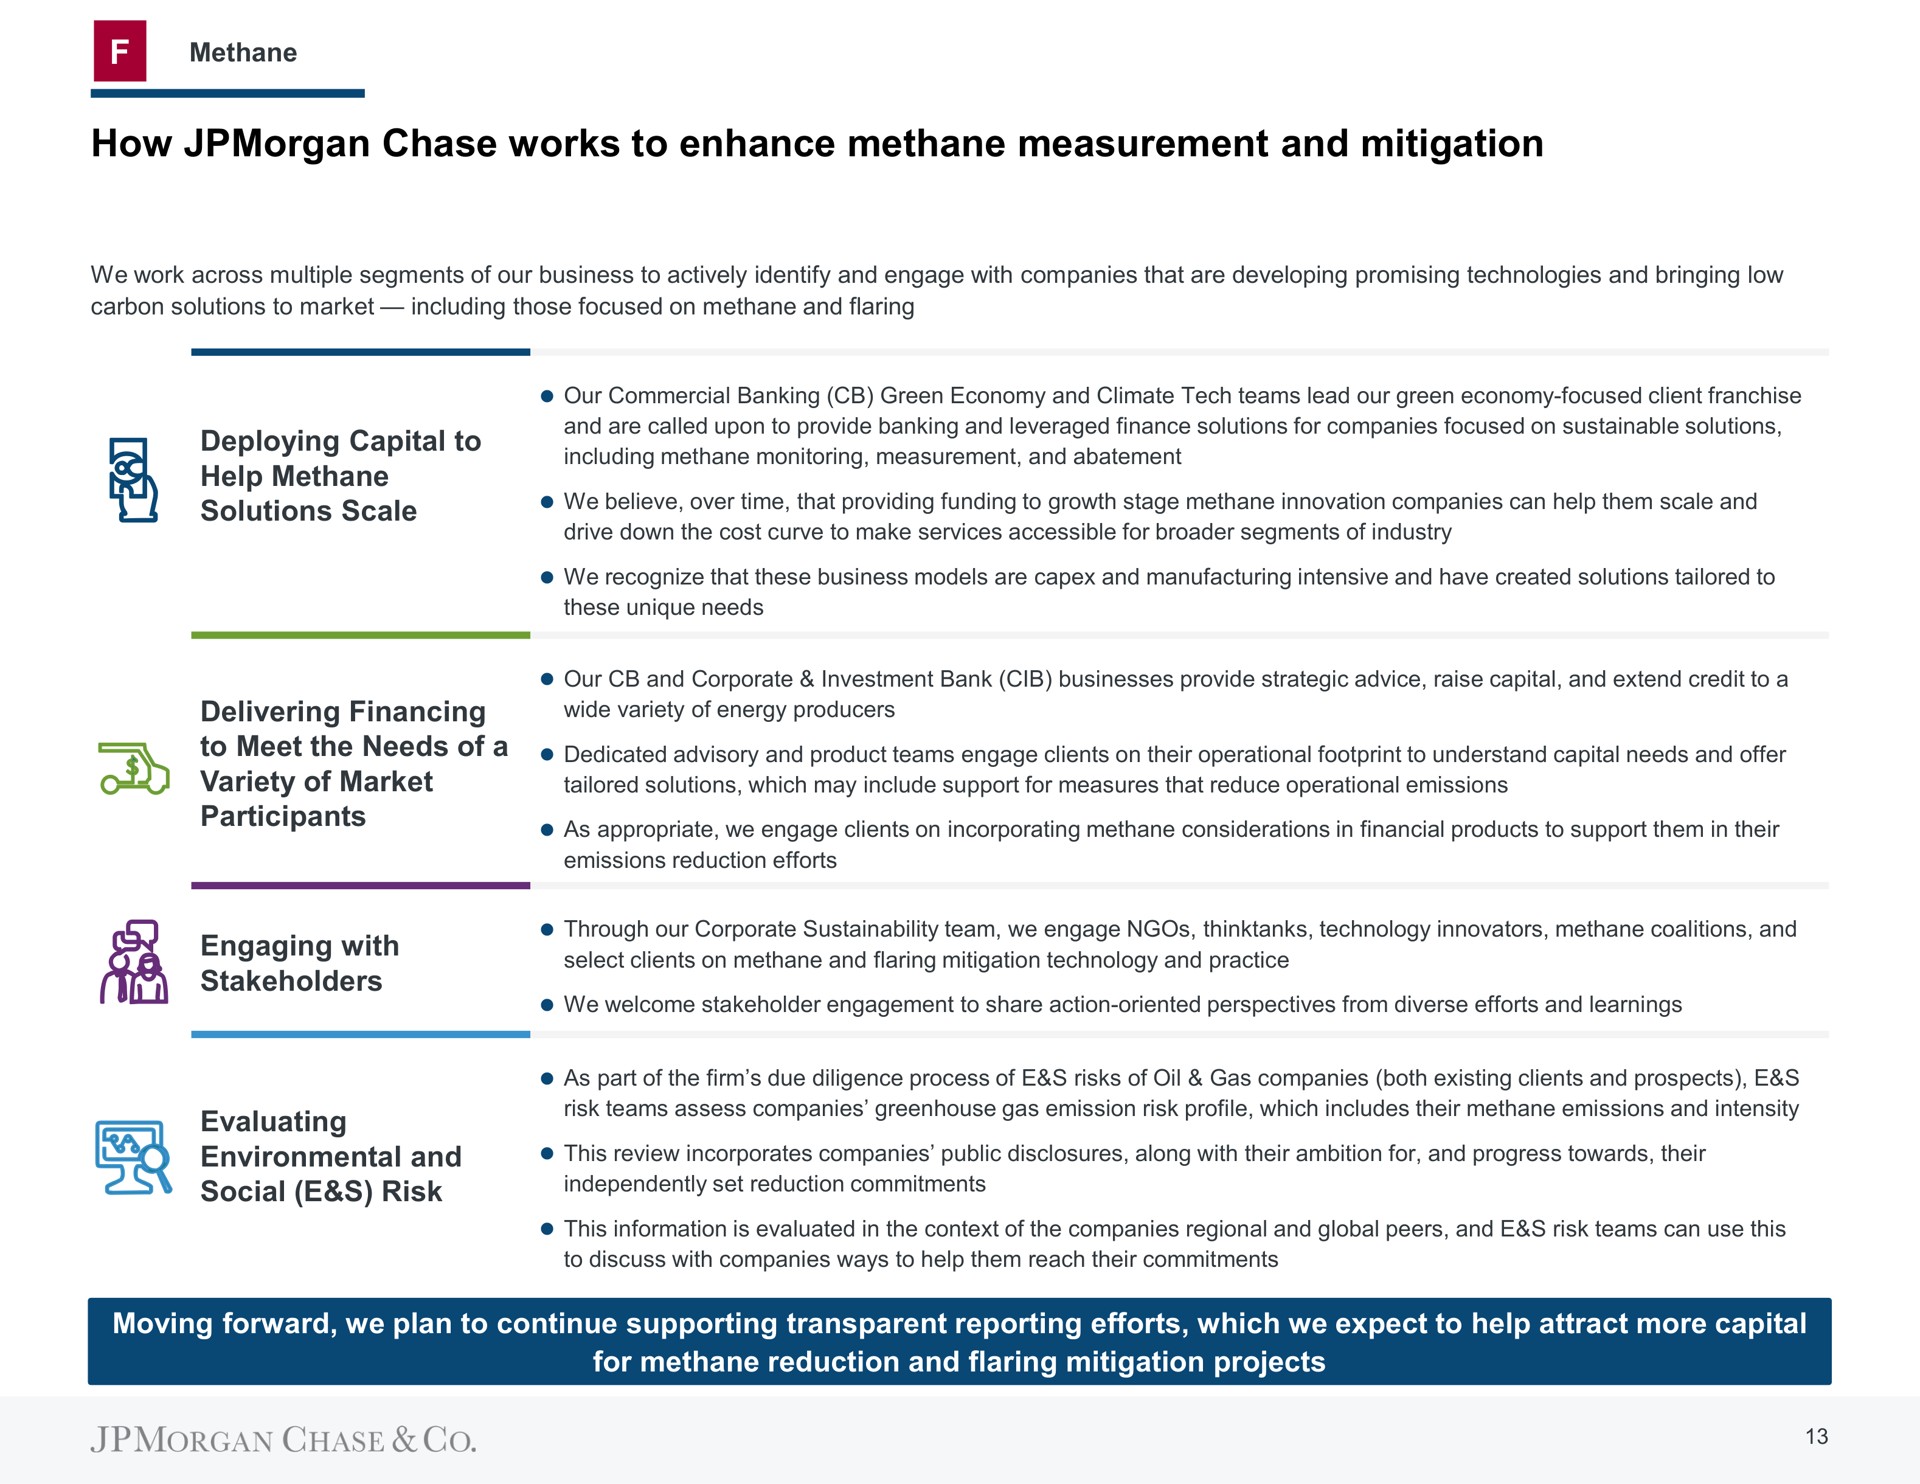 how chase works to enhance methane measurement and mitigation | J.P.Morgan